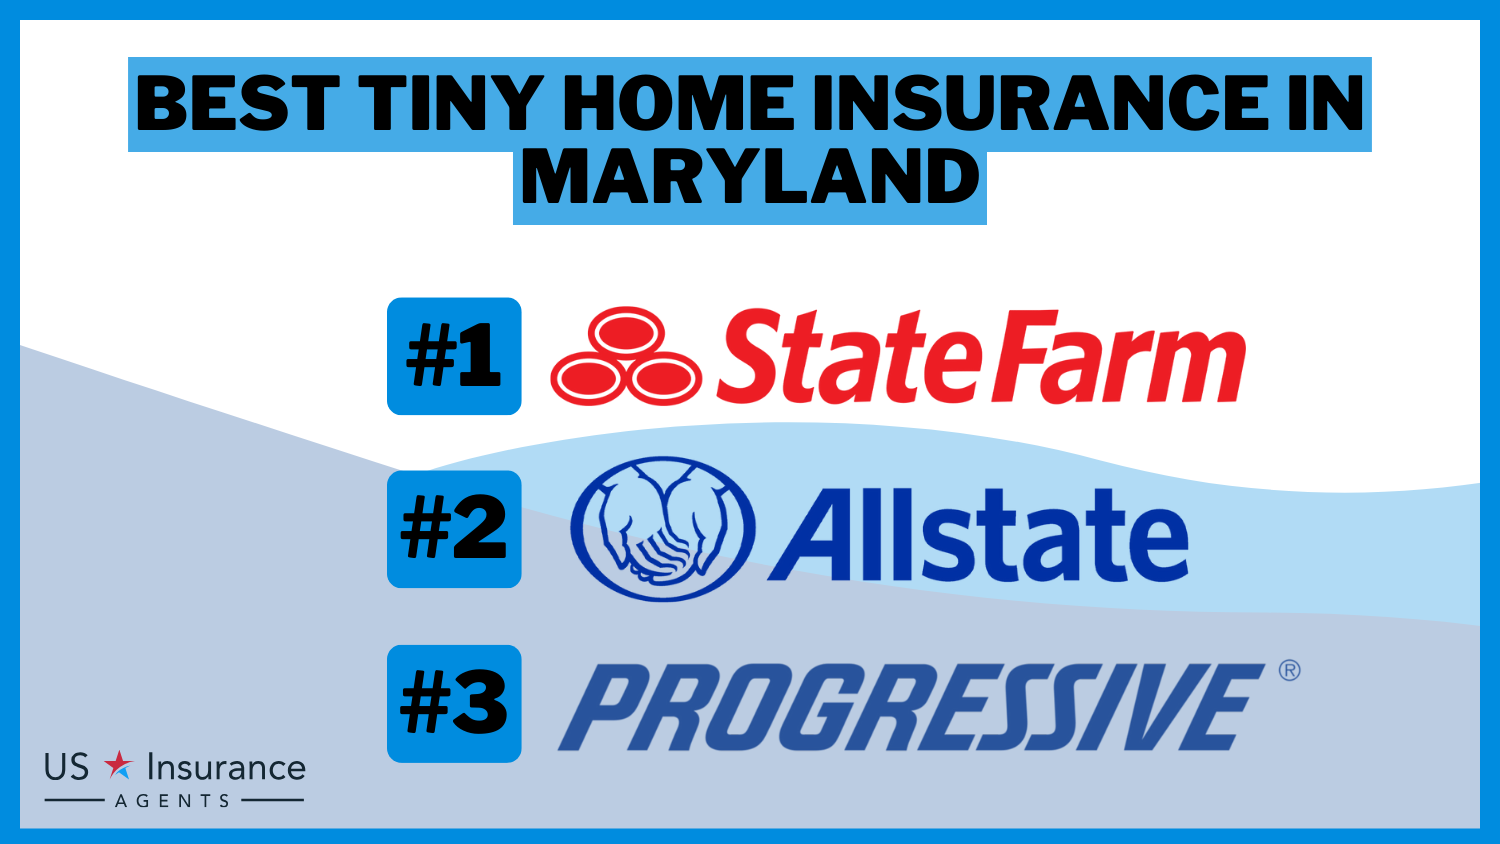 Best Tiny Home Insurance in Maryland: State Farm, Allstate, and Progressive